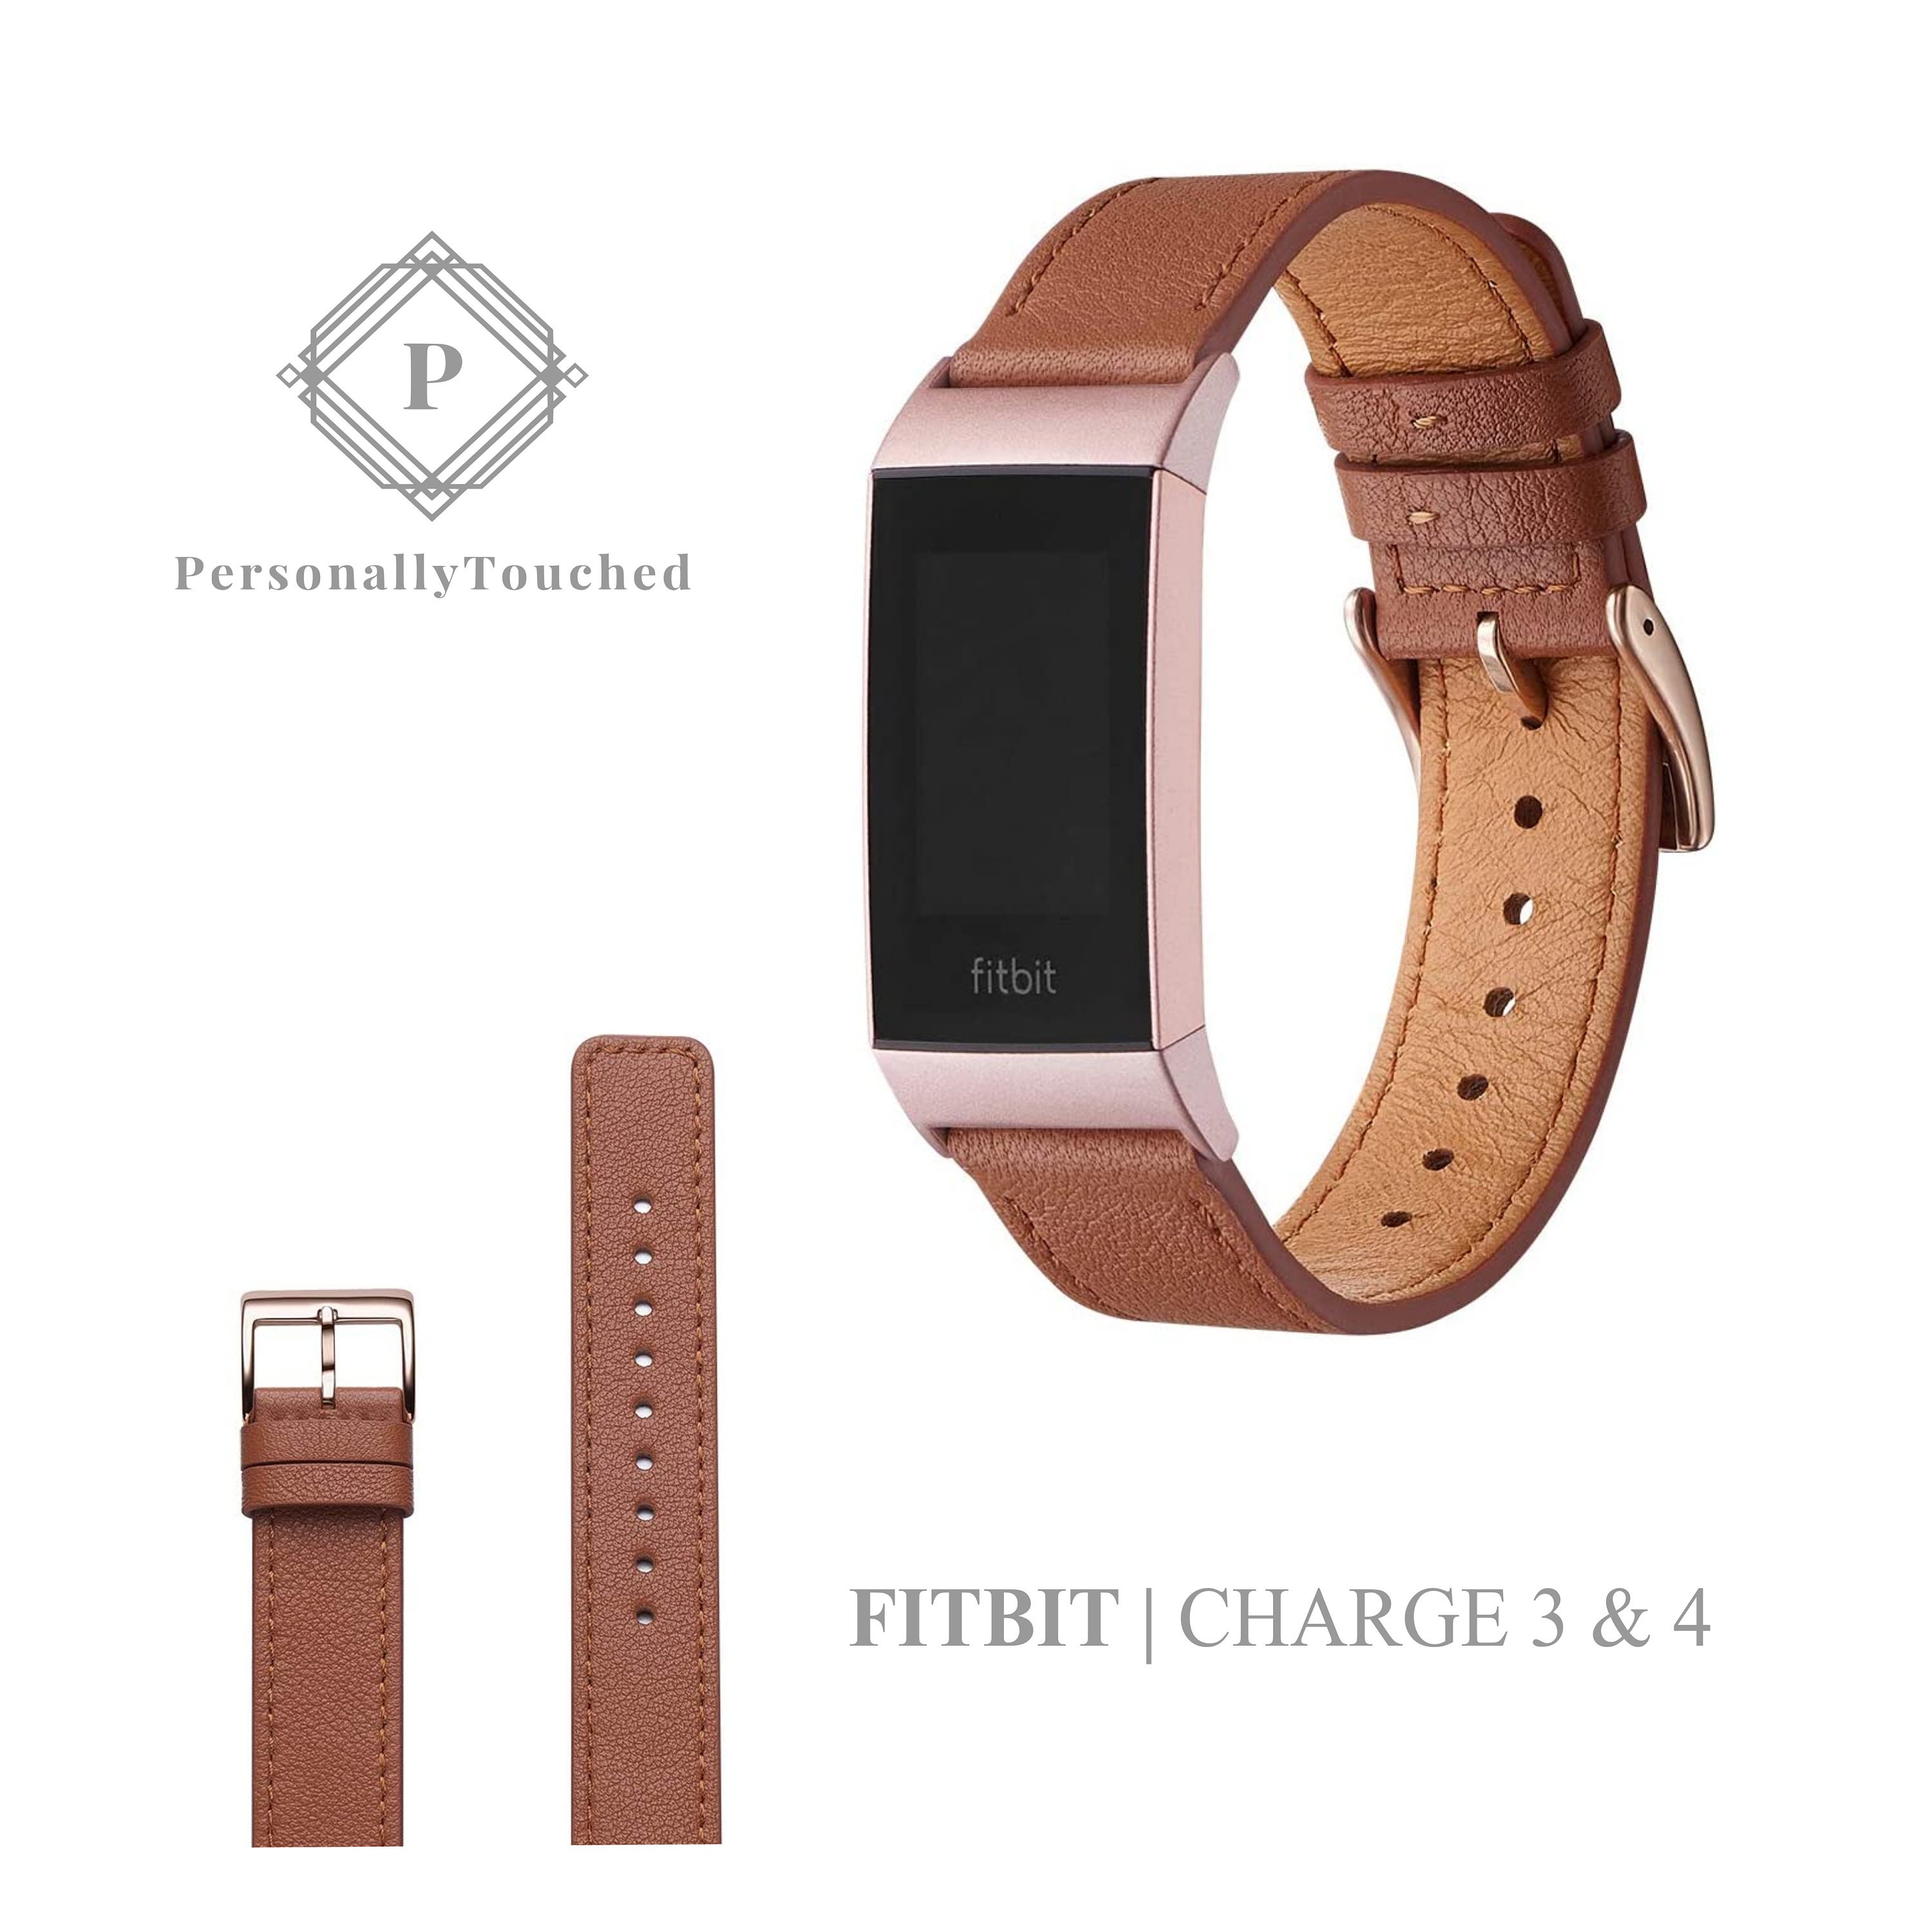 Slim Genuine Leather Wristband Replacement Accessories Strap for Women Men Compatible with Fitbit Charge 3 NANW Bands Compatible with Fitbit Charge 3 Charge 3 SE Small Large 